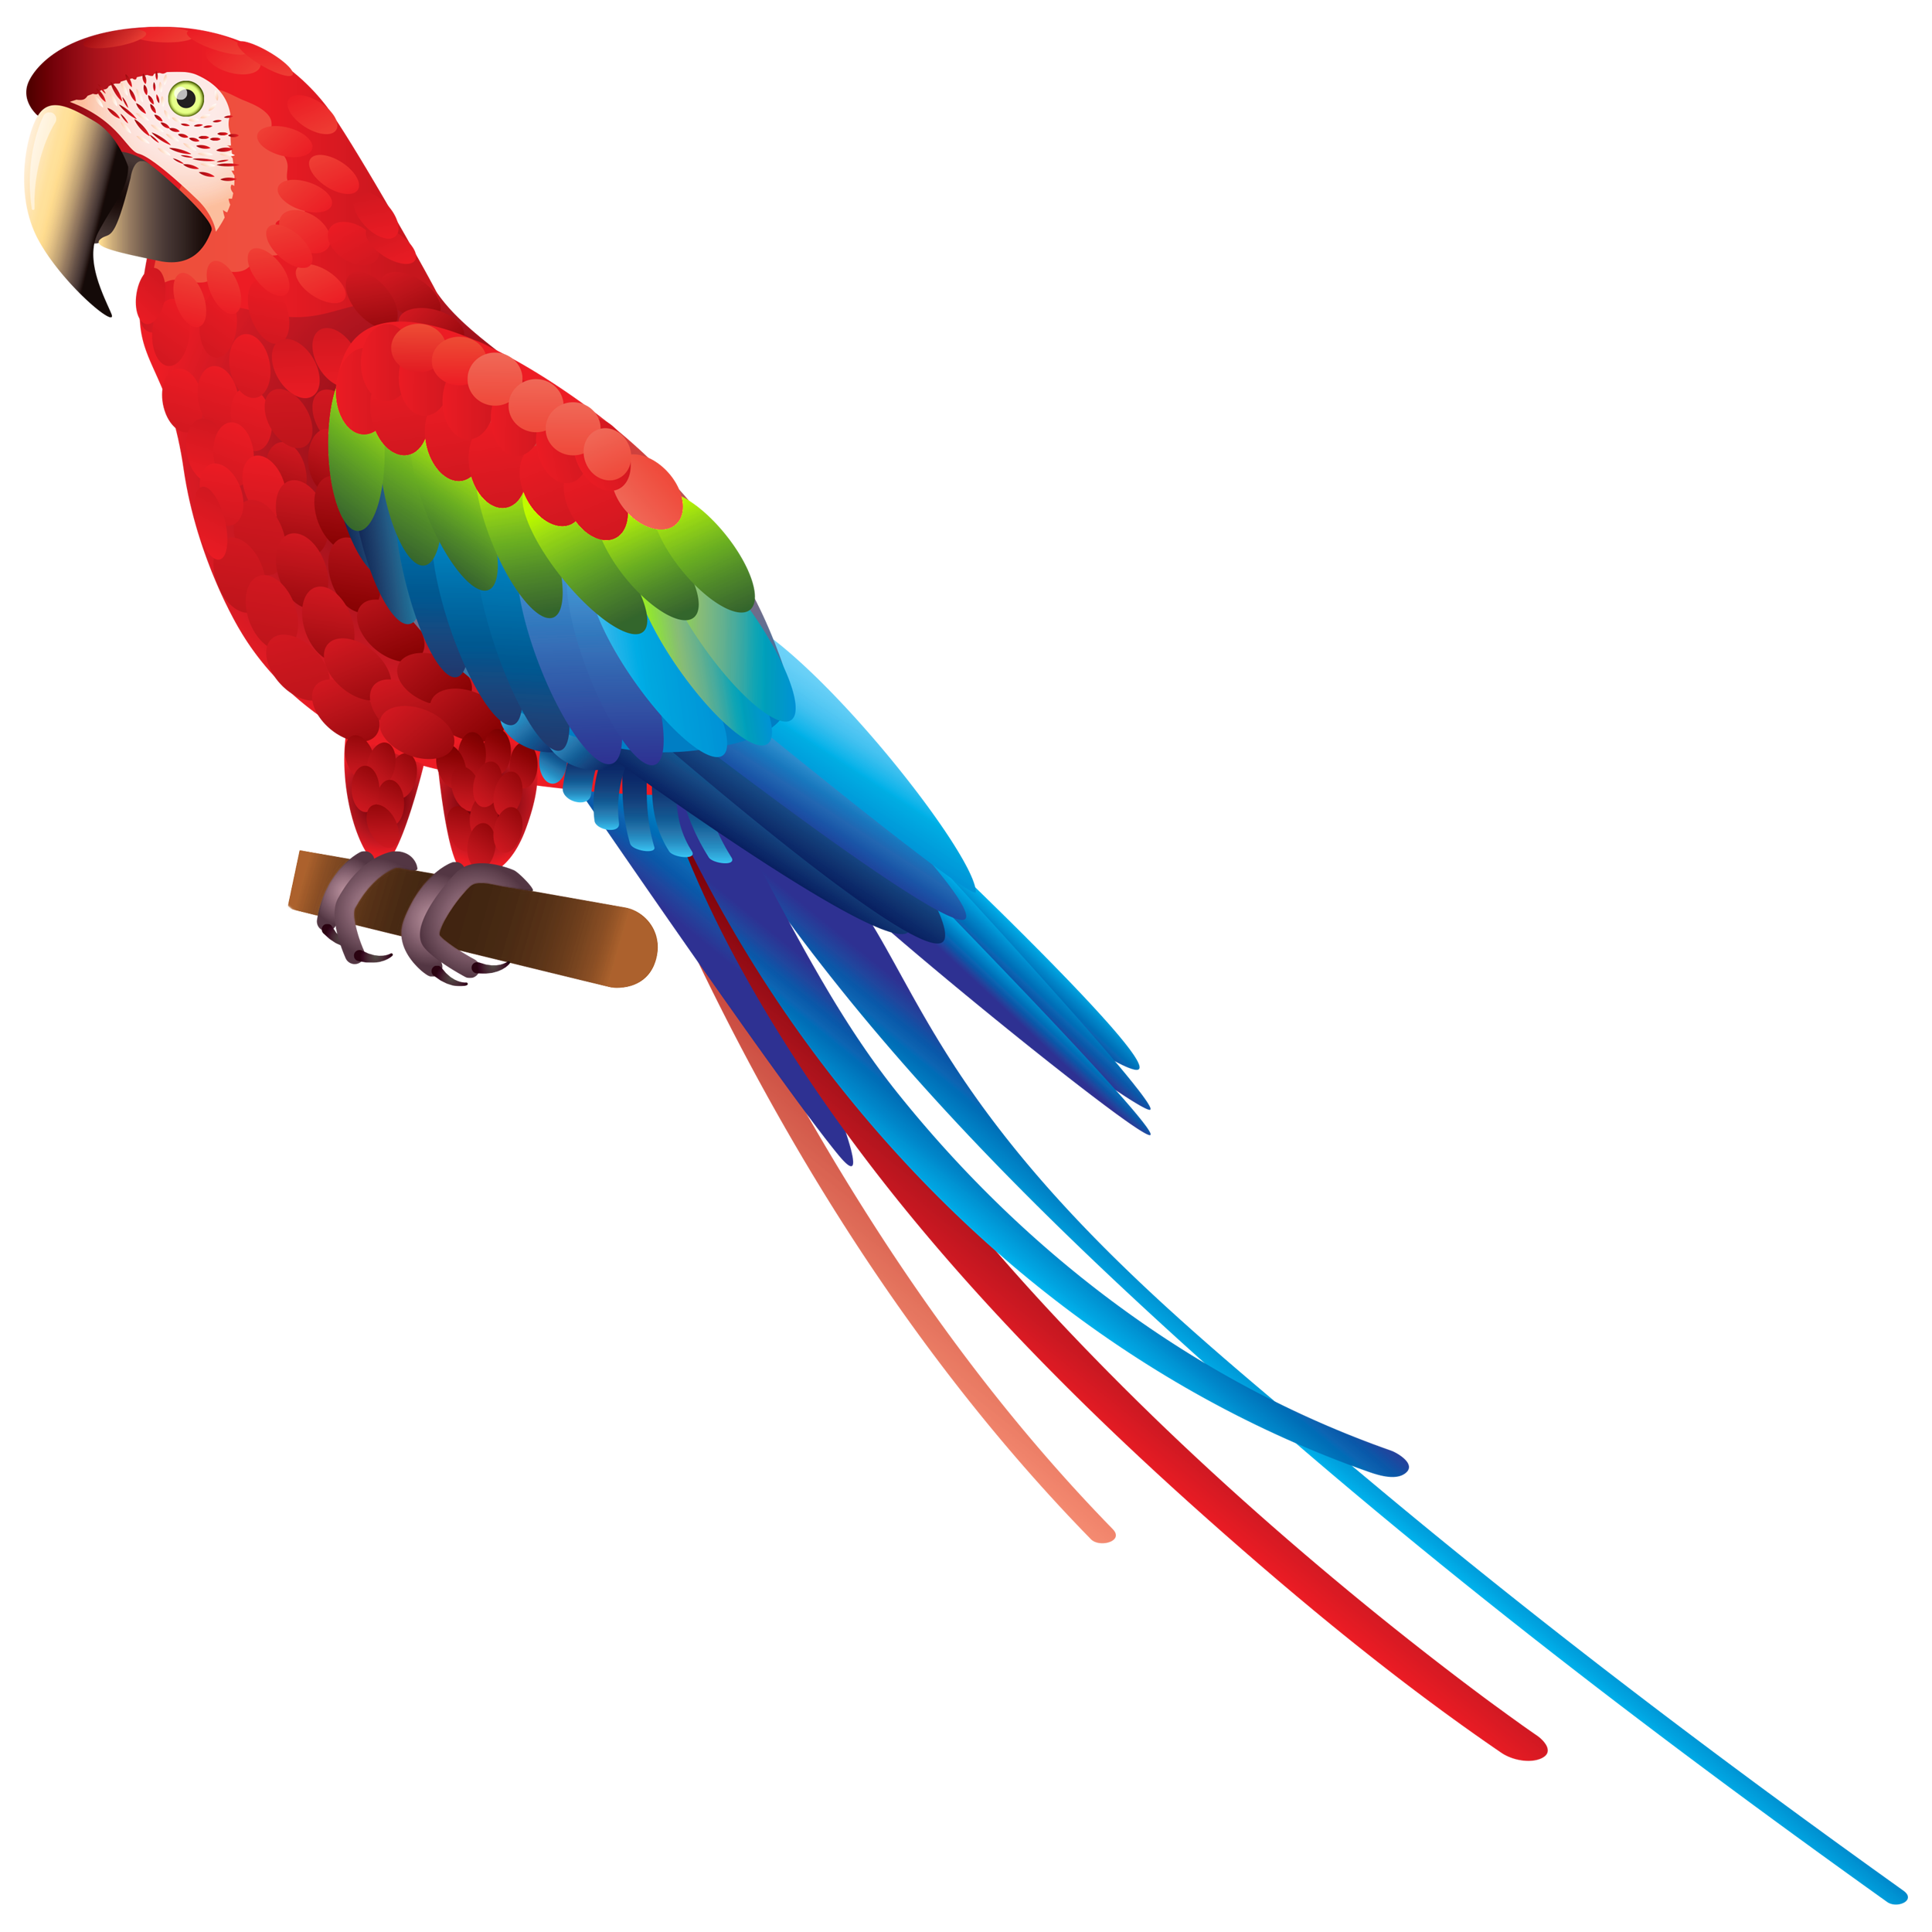 Red Parrot Transparent Picture